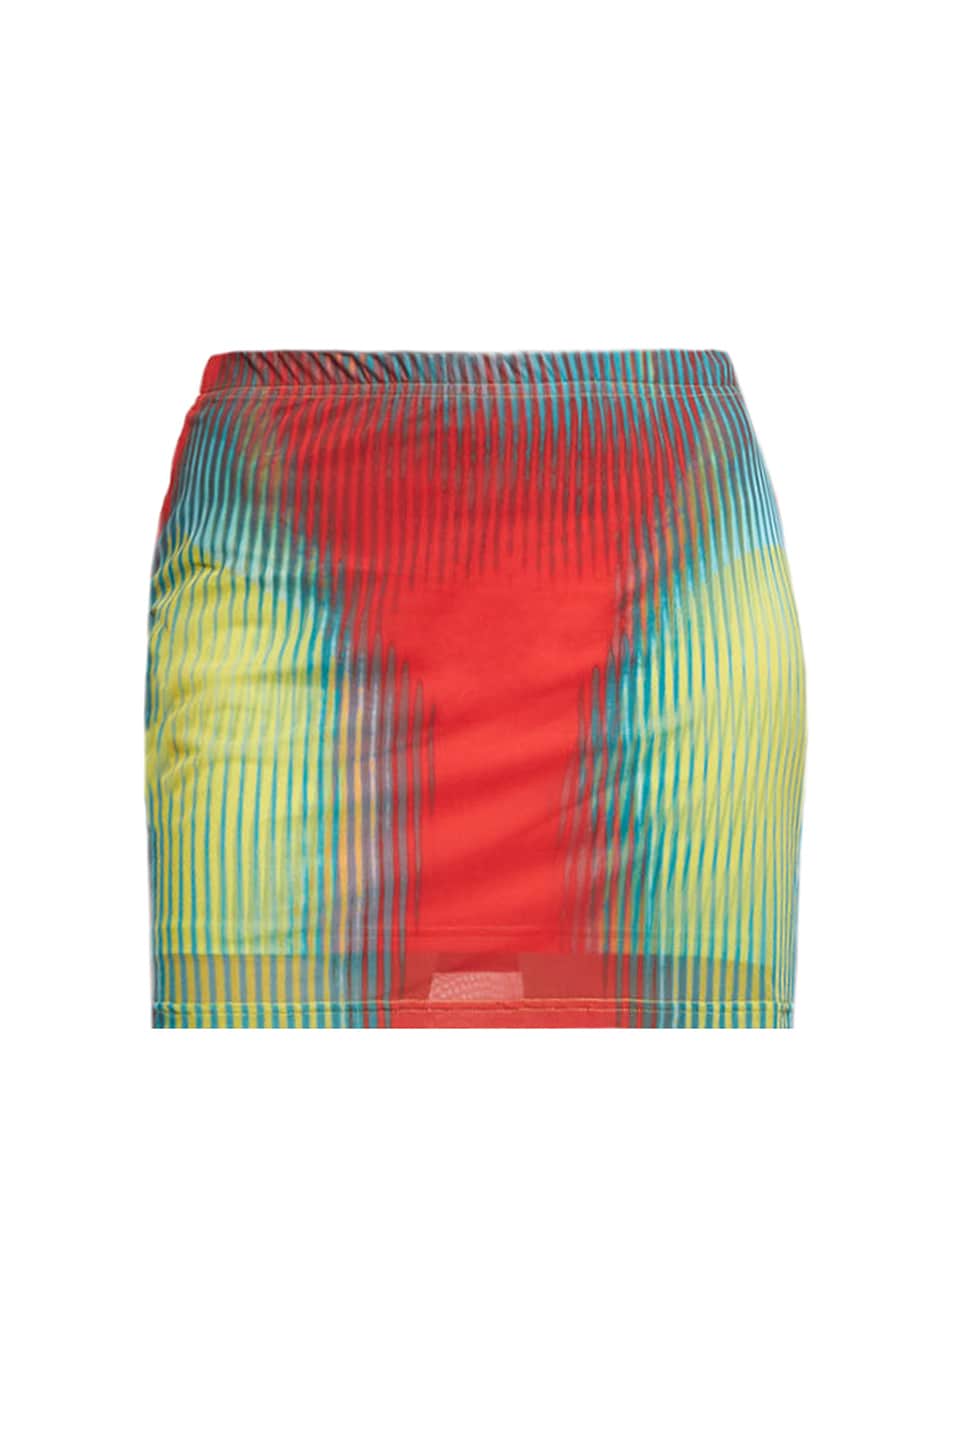 Image 1 of Y/Project x Jean-Paul Gaultier Body Morph Mini Skirt in Yellow, Red, & Blue